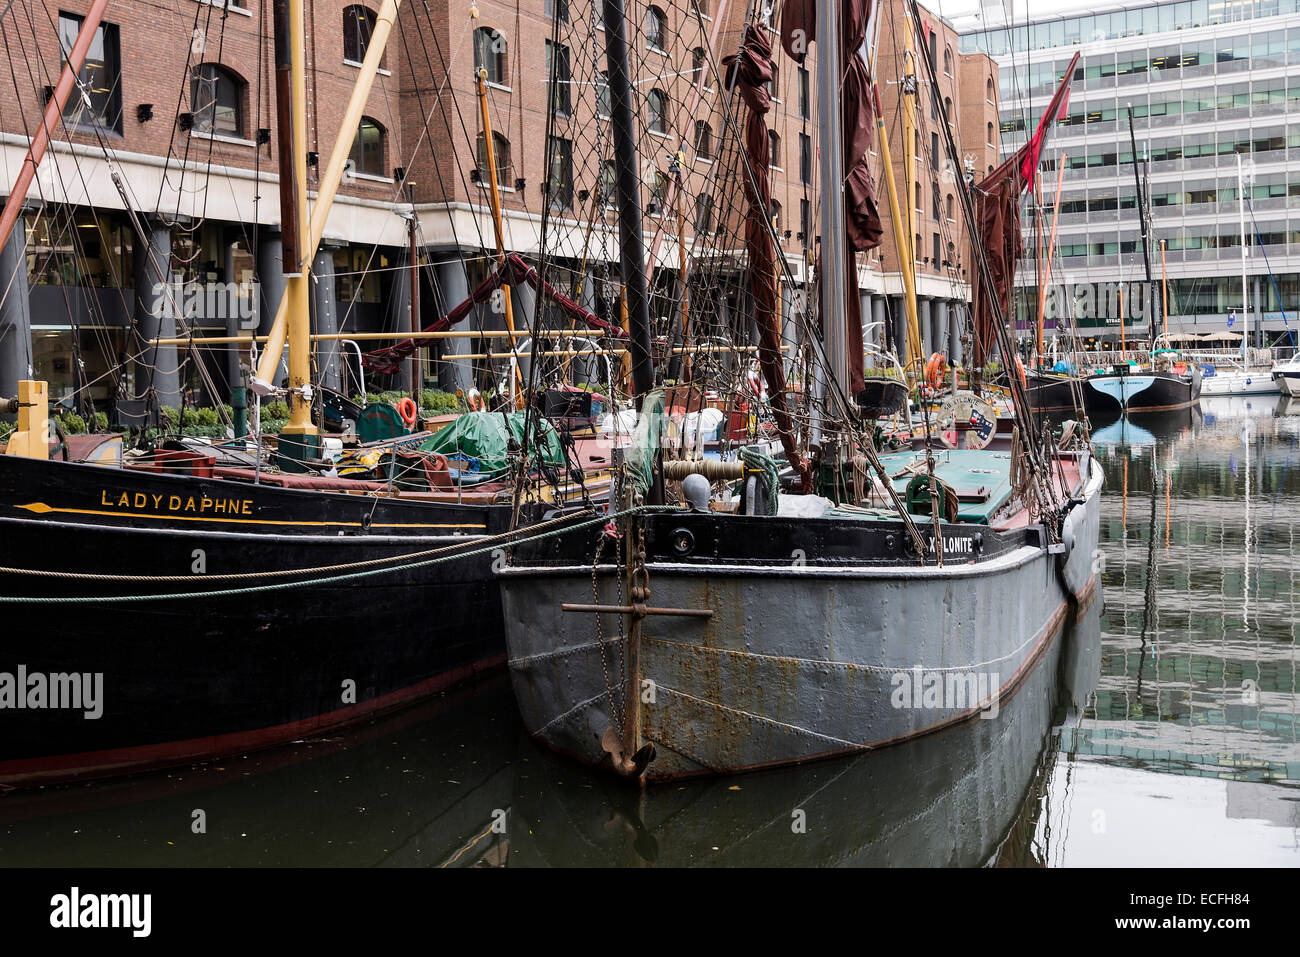 Old Thames Barges and Boats Moored in the Marina at St Katharine Docks Tower Hamlets London England United Kingdom UK Stock Photo